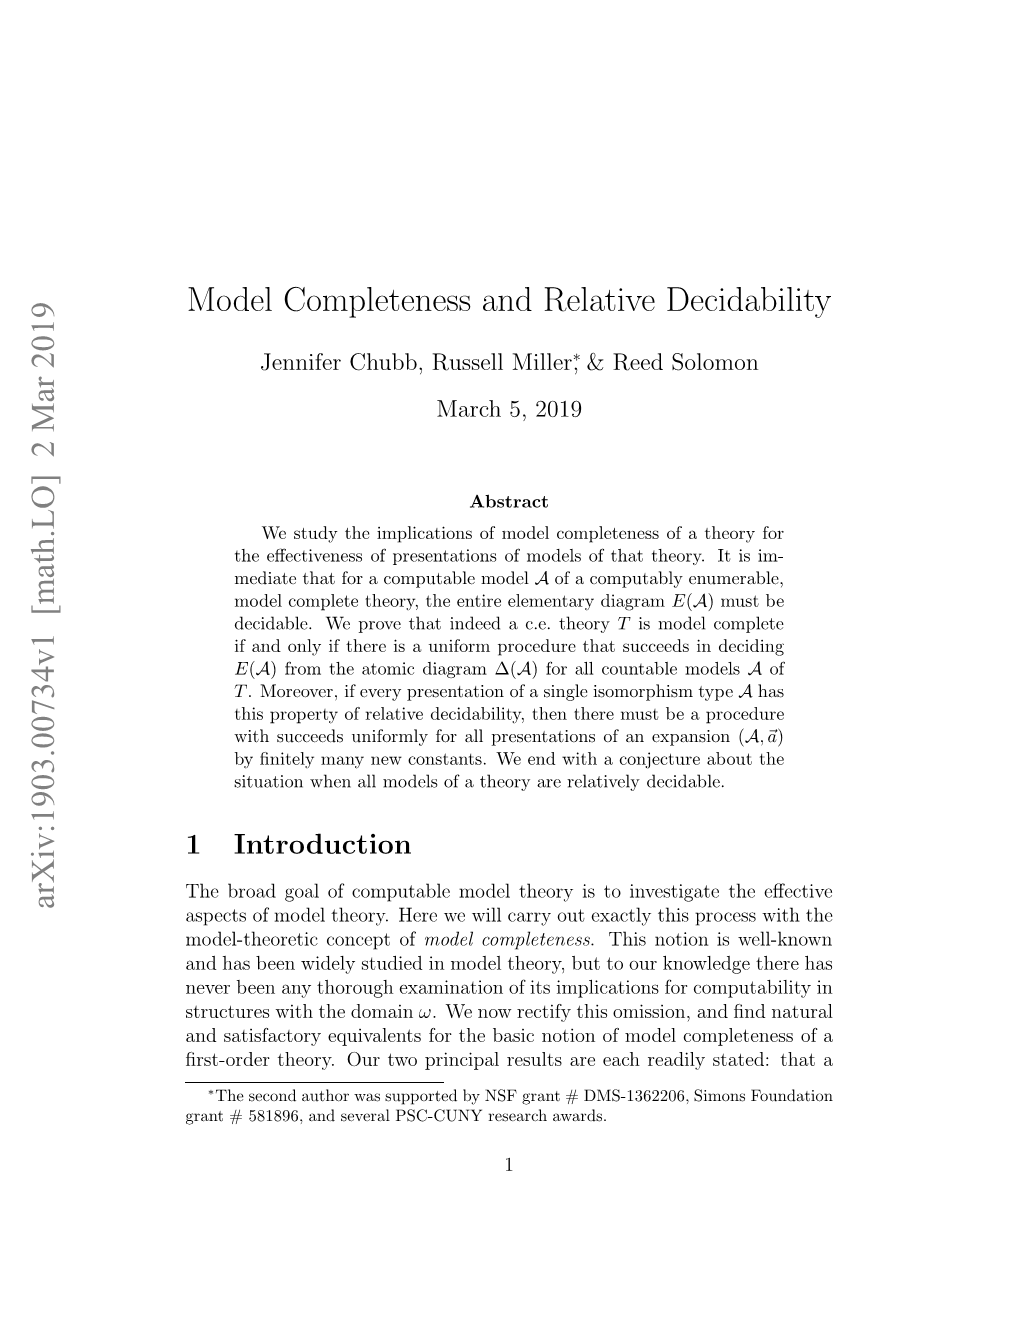 Model Completeness and Relative Decidability